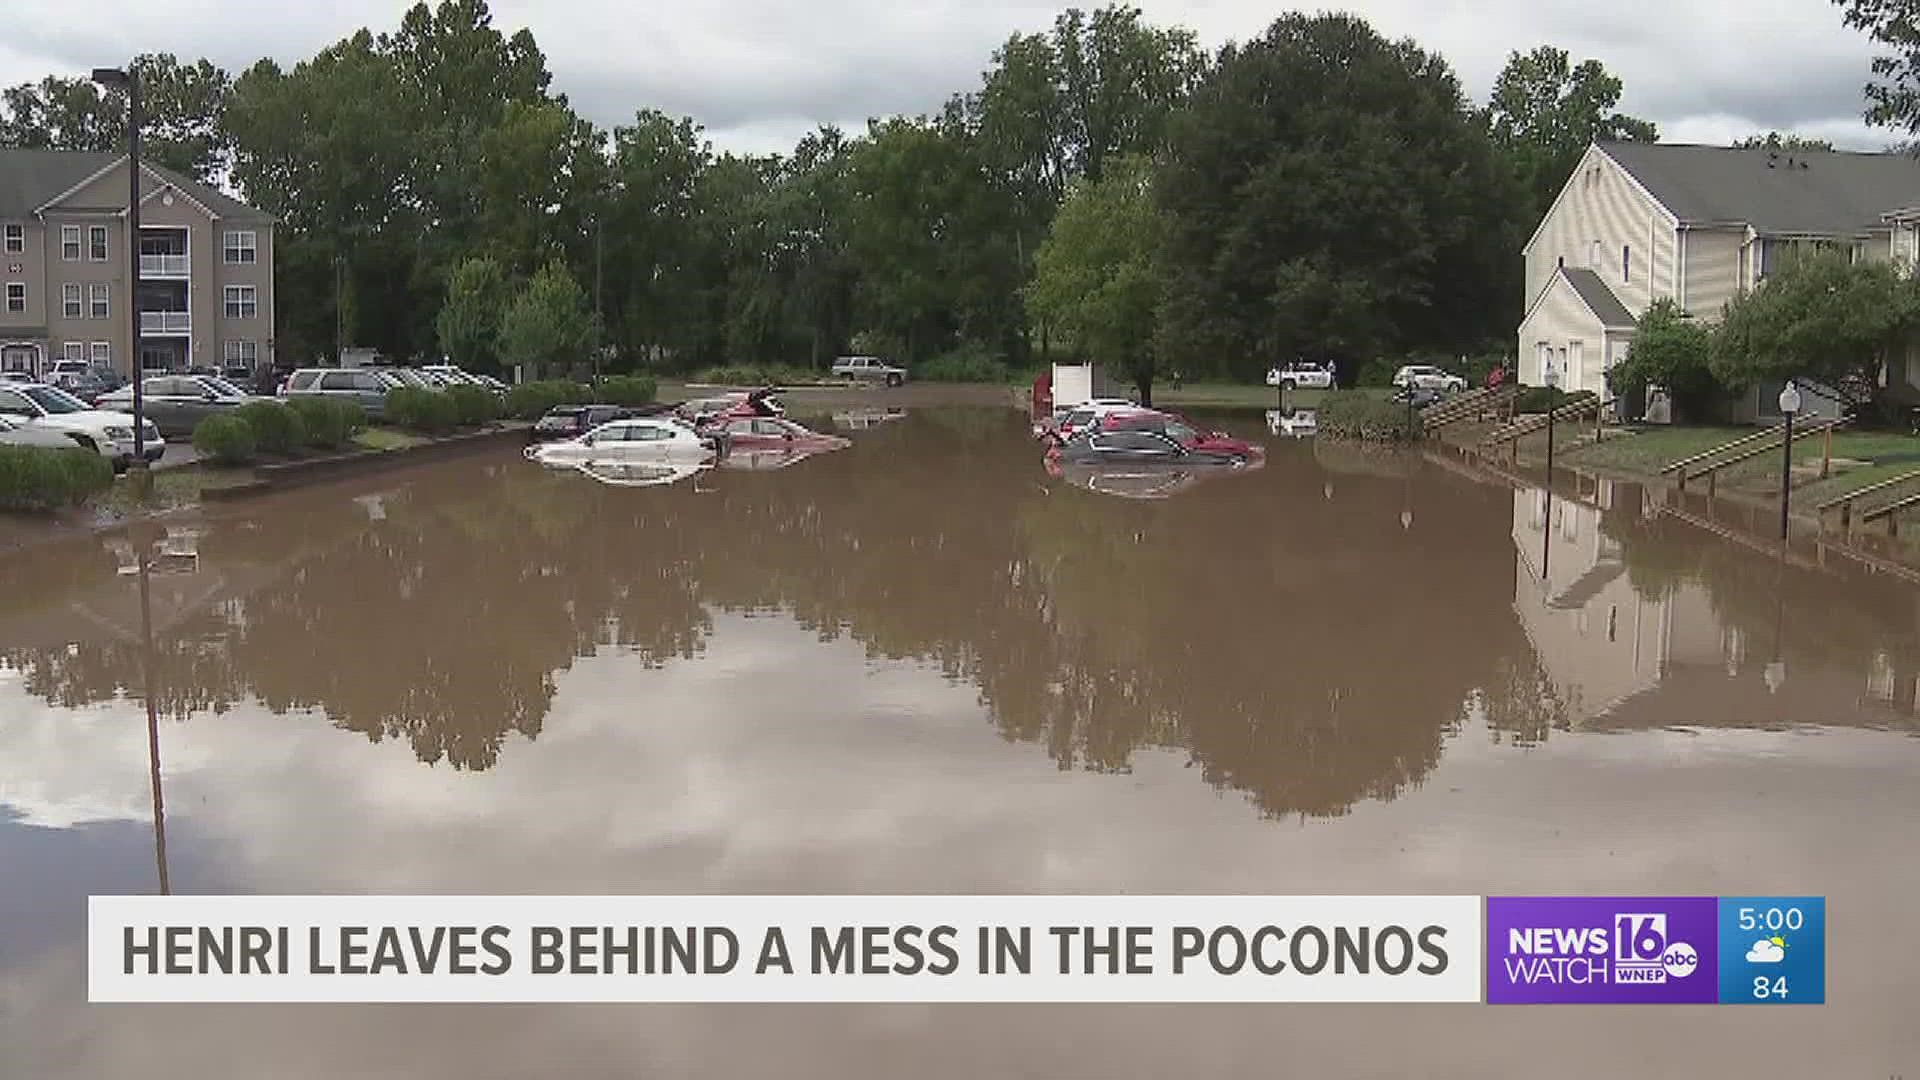 That heavy rain caused major issues in Monroe County, from flooded roadways to people pulled from their beds overnight.